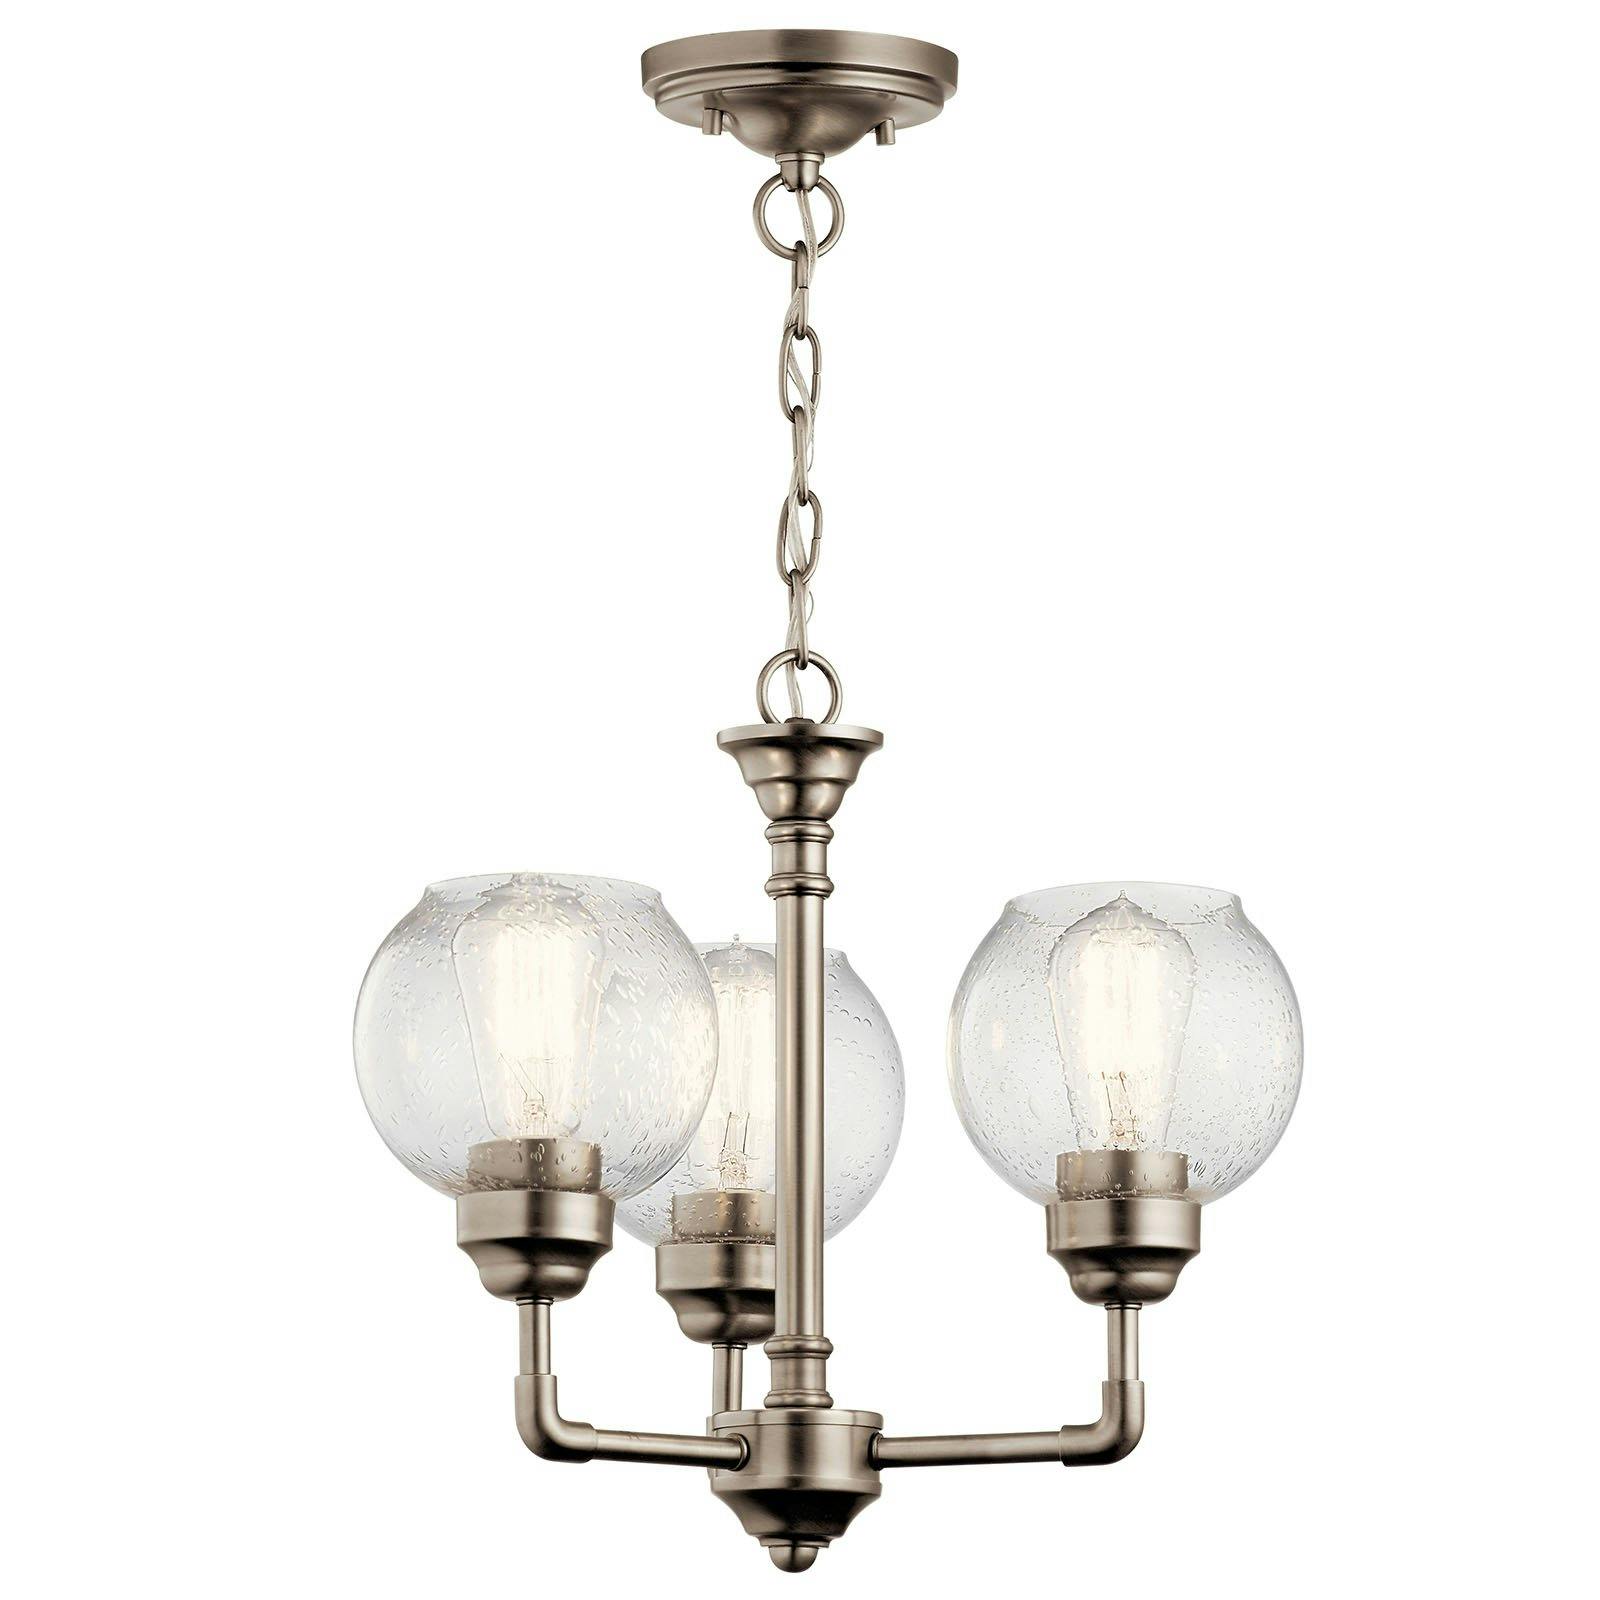 Niles 3 Light Chandelier Antique Pewter on a white background